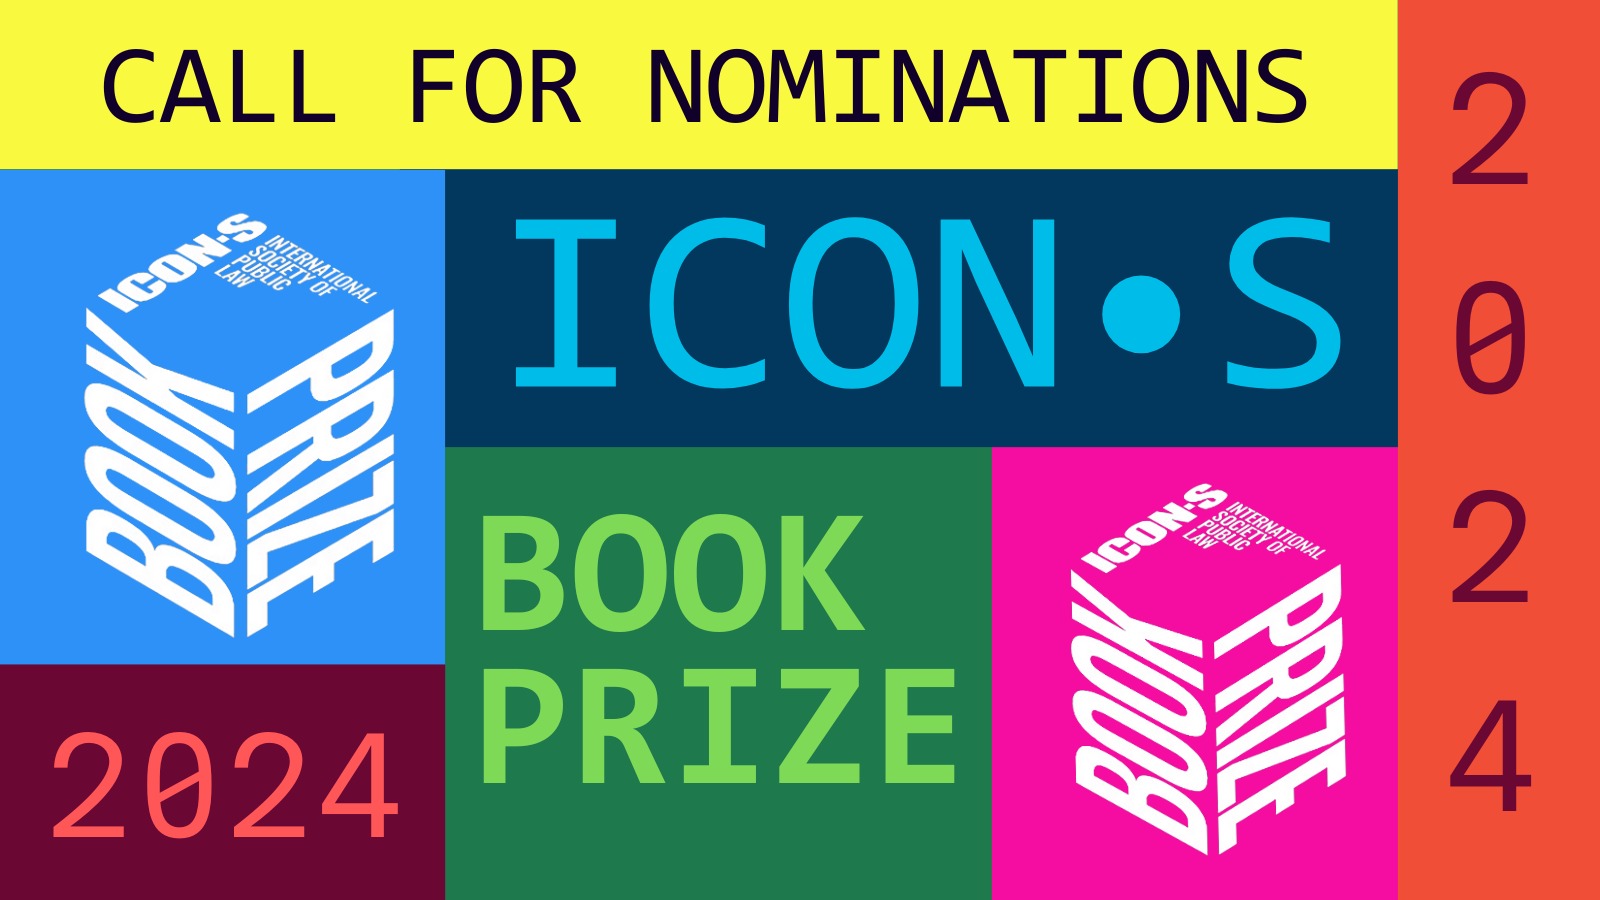 <strong>Call for nominations for the ICON•S Book Prize</strong>